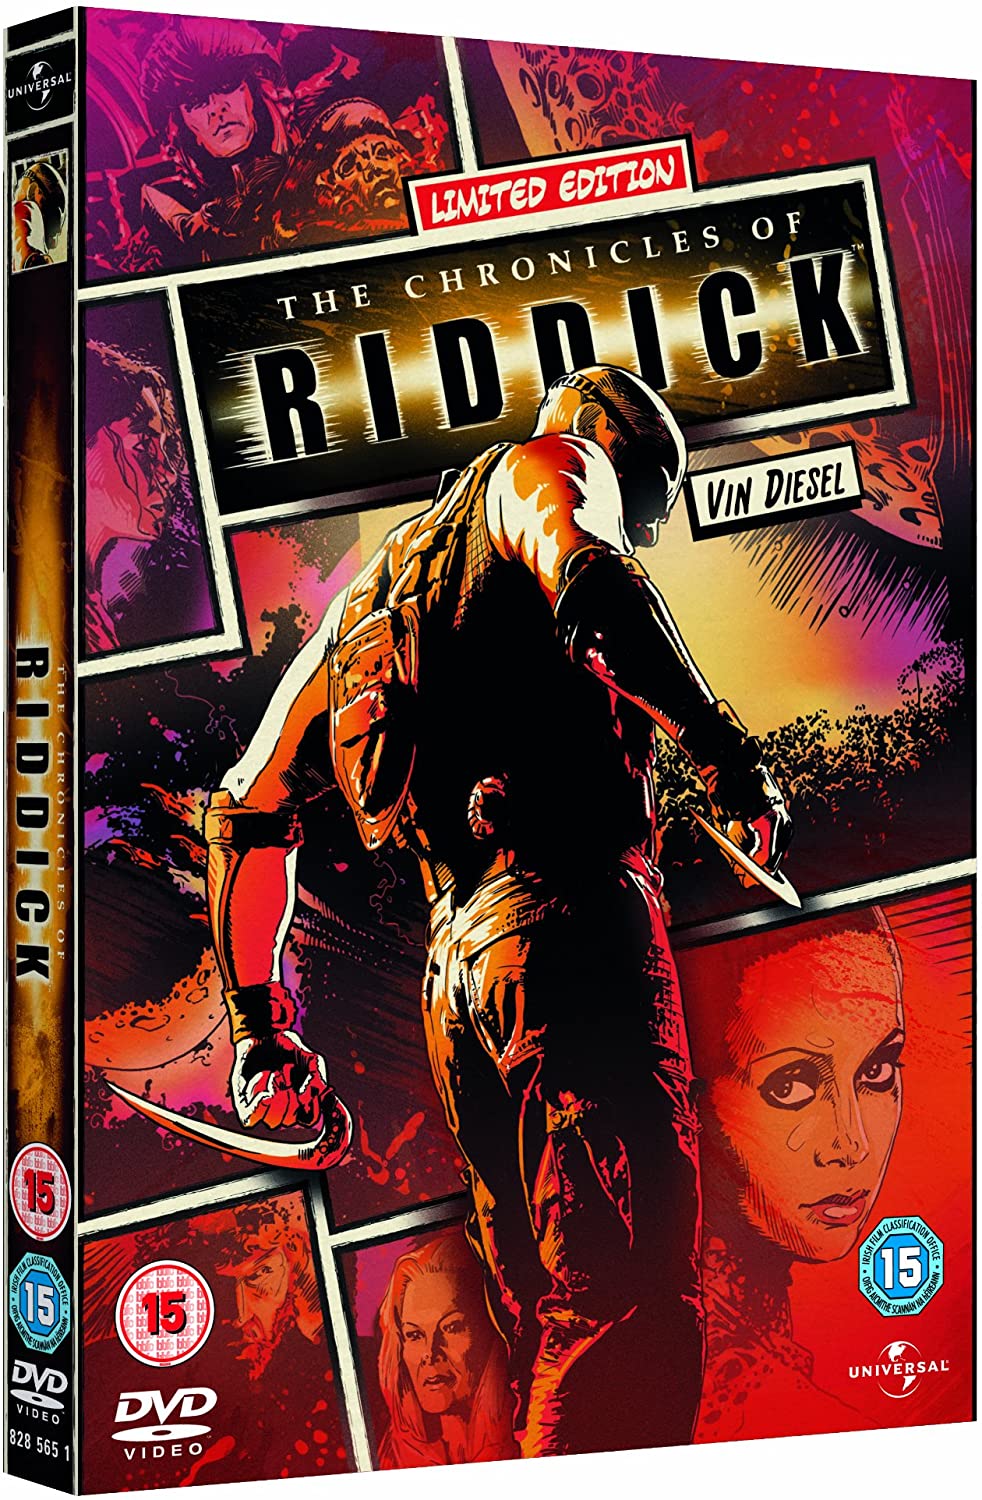 Reel Heroes: Chronicles Of Riddick - Fantasy/Action [DVD]